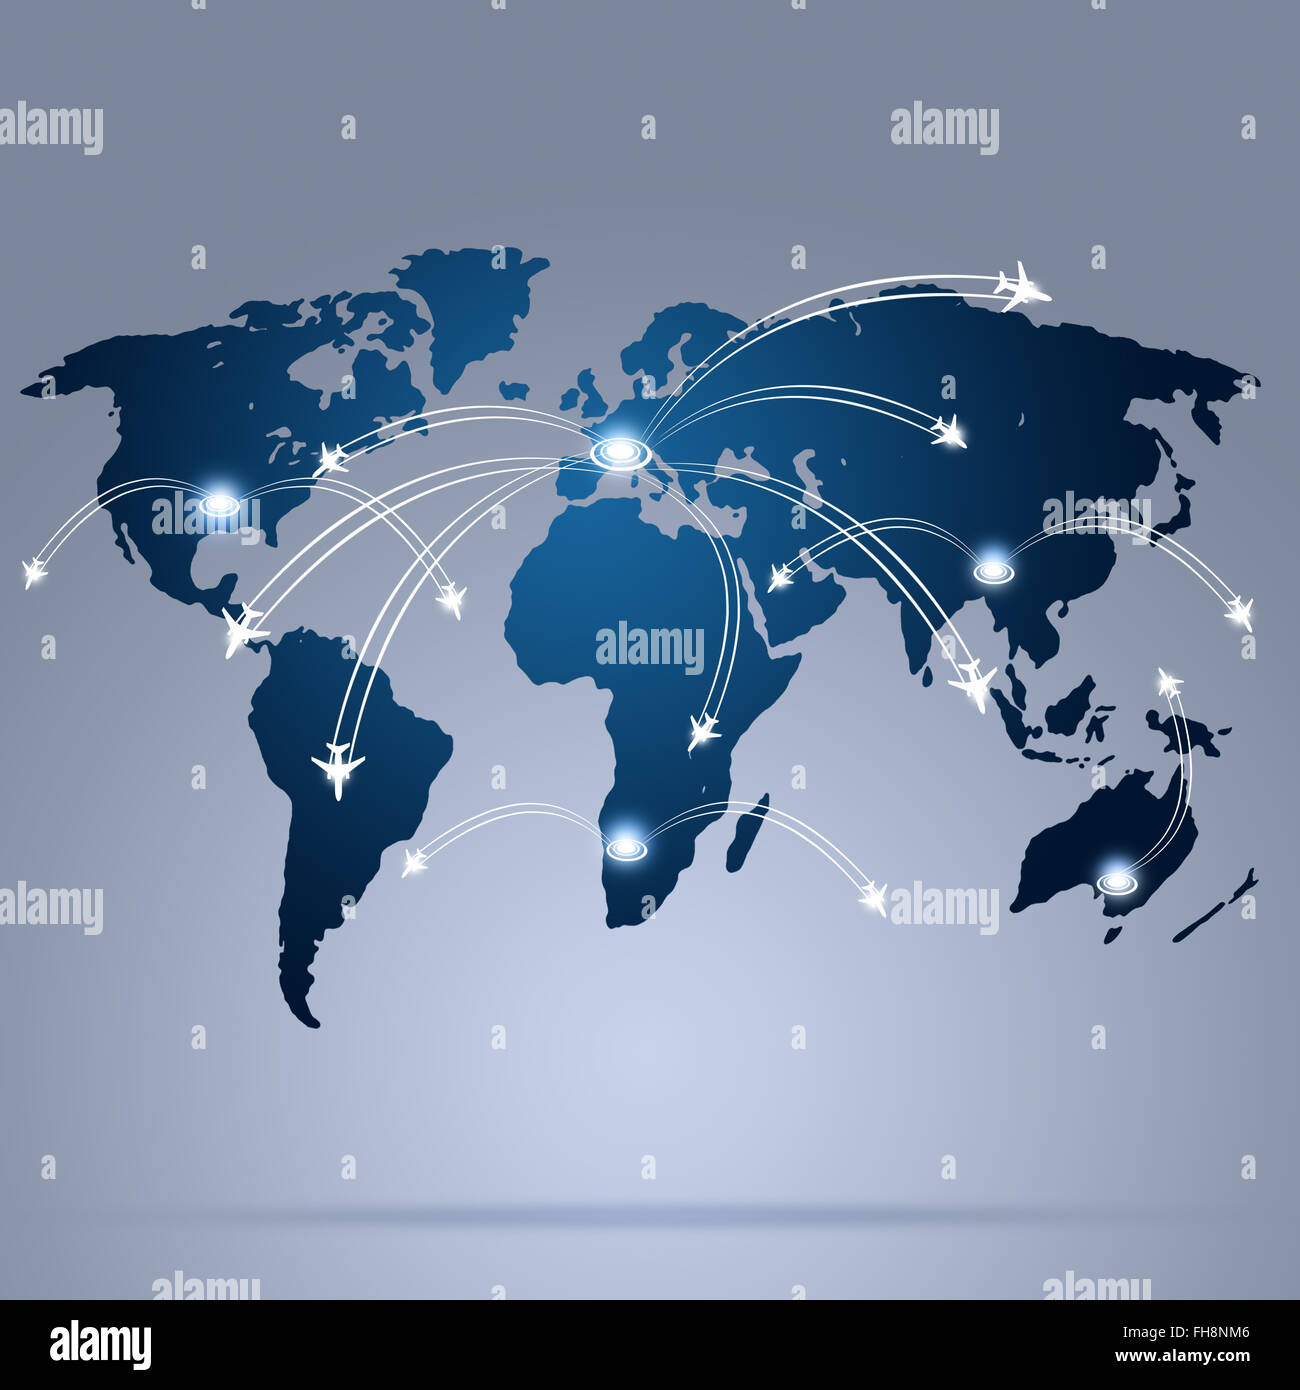 global aviation background with airplanes over the map Stock Photo